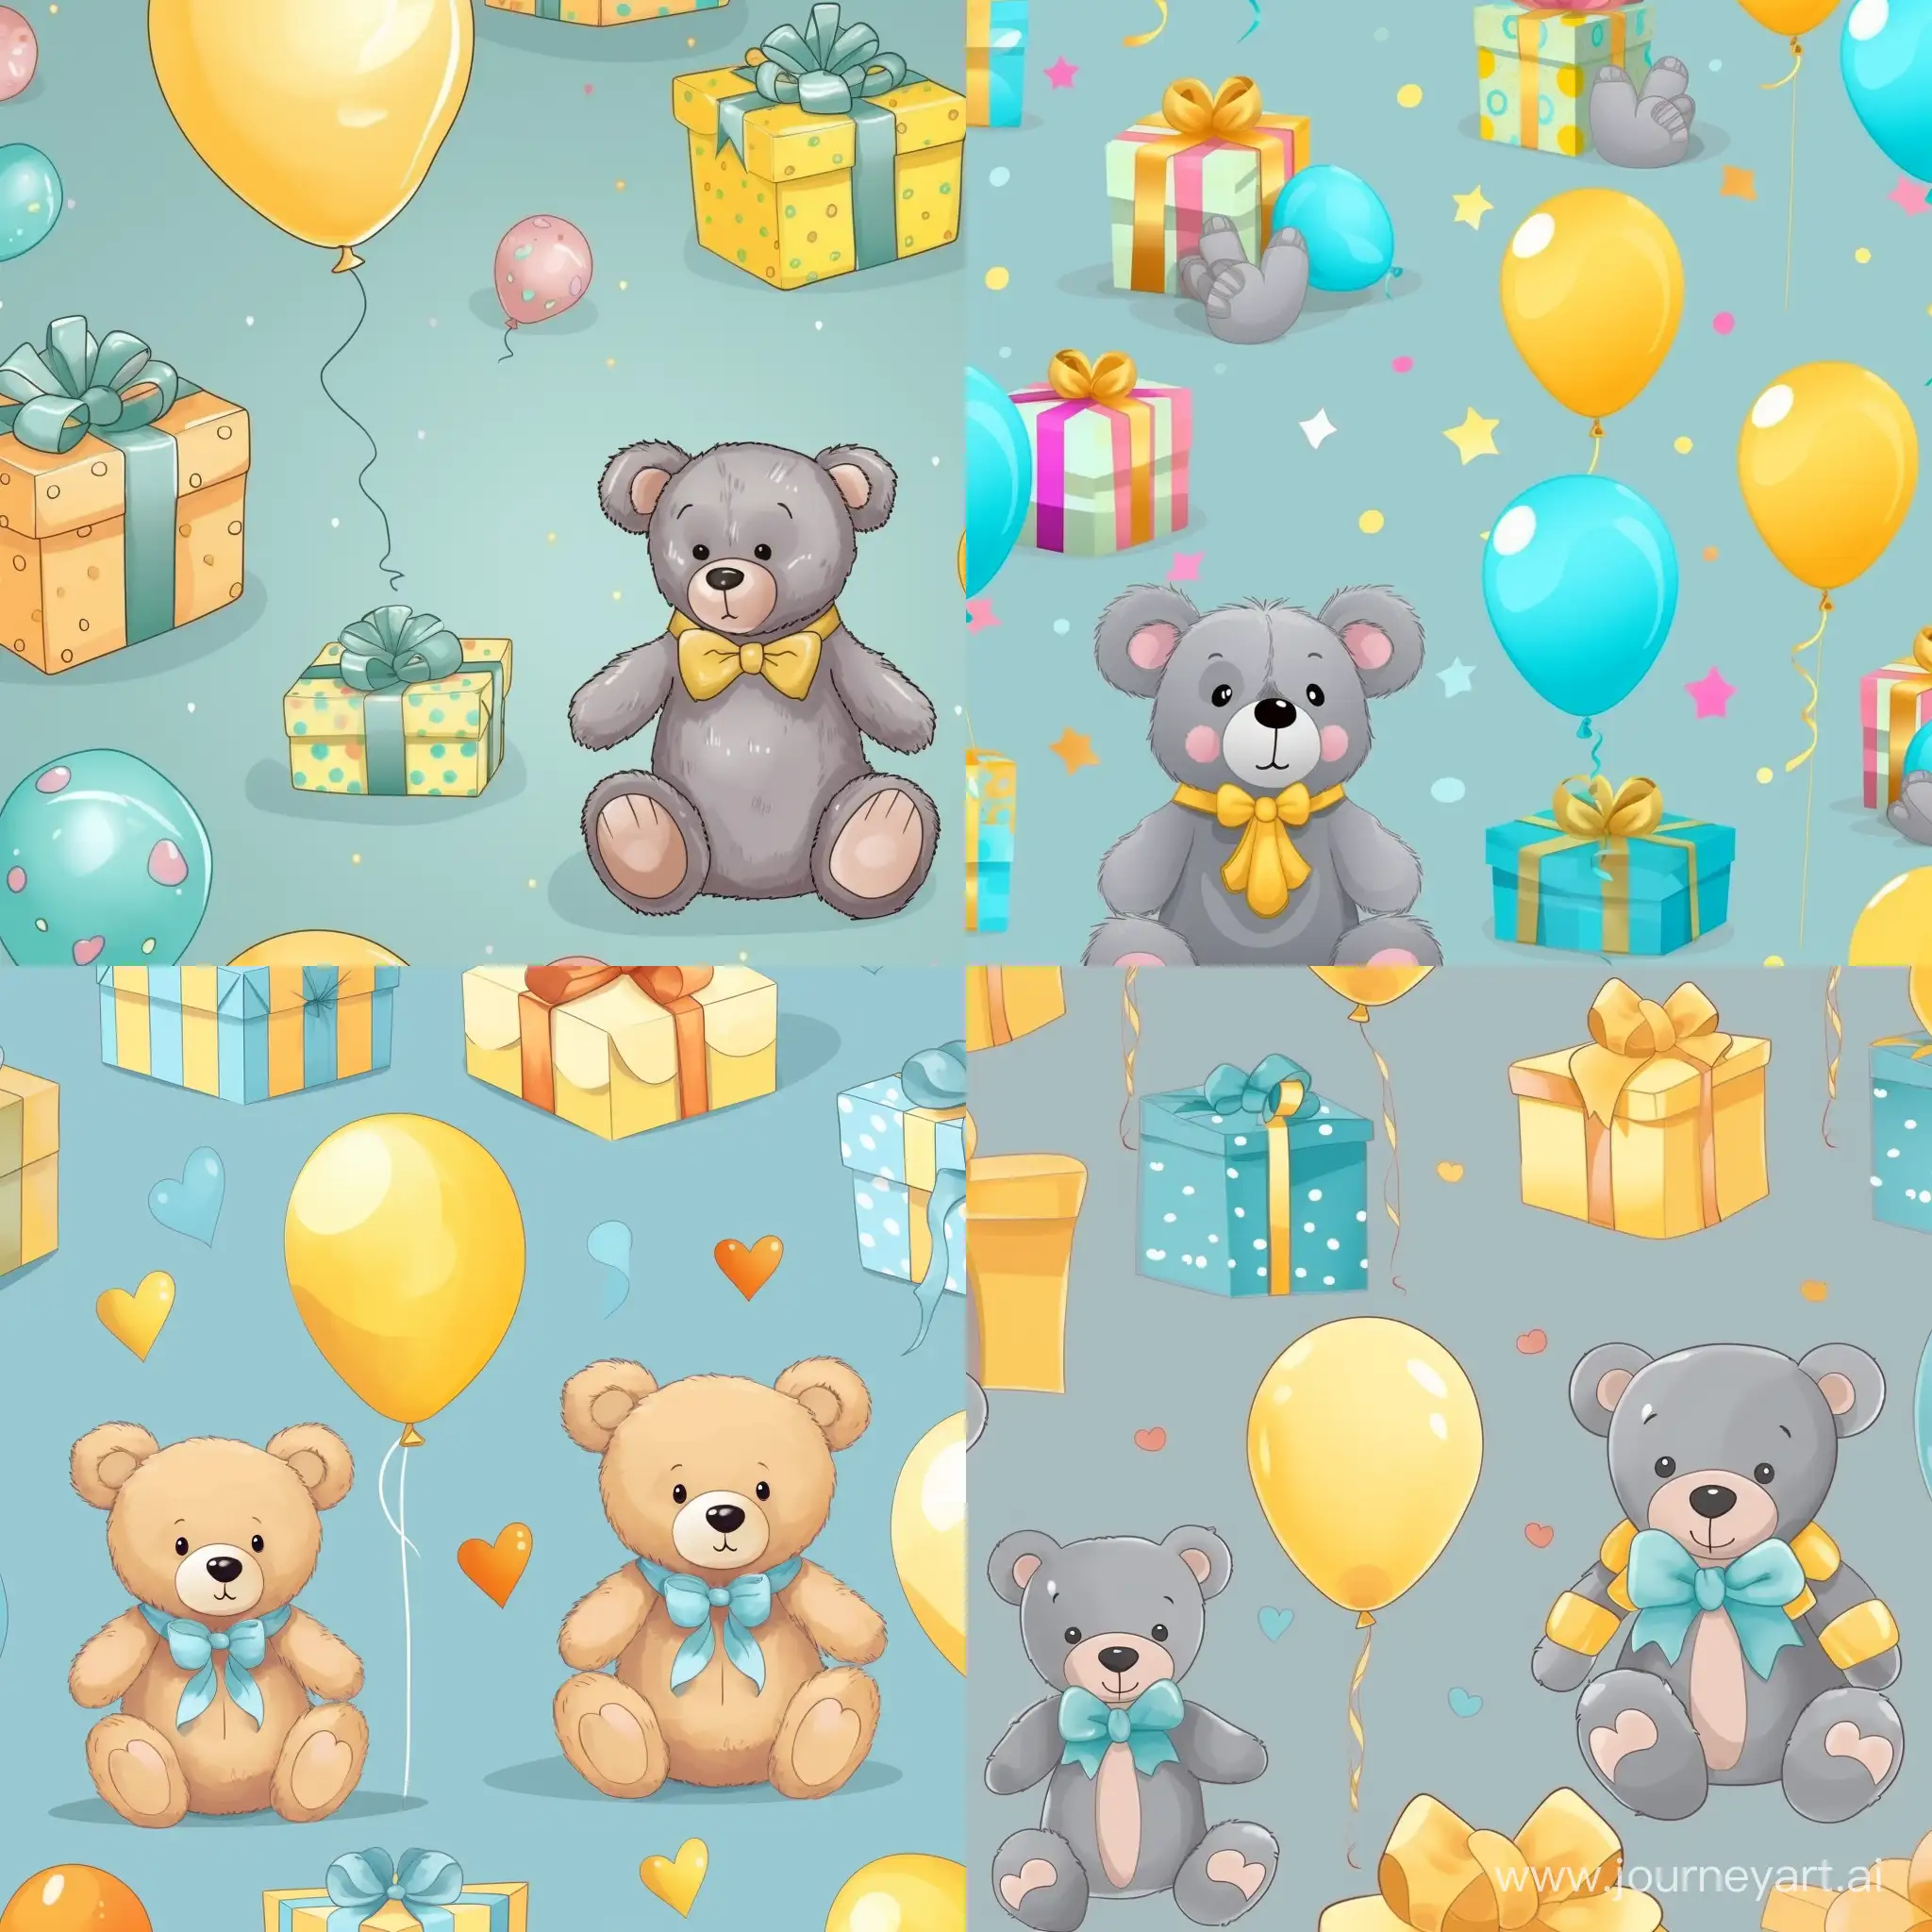 Cheerful-Gift-Celebration-with-Teddy-Bear-and-Balloons